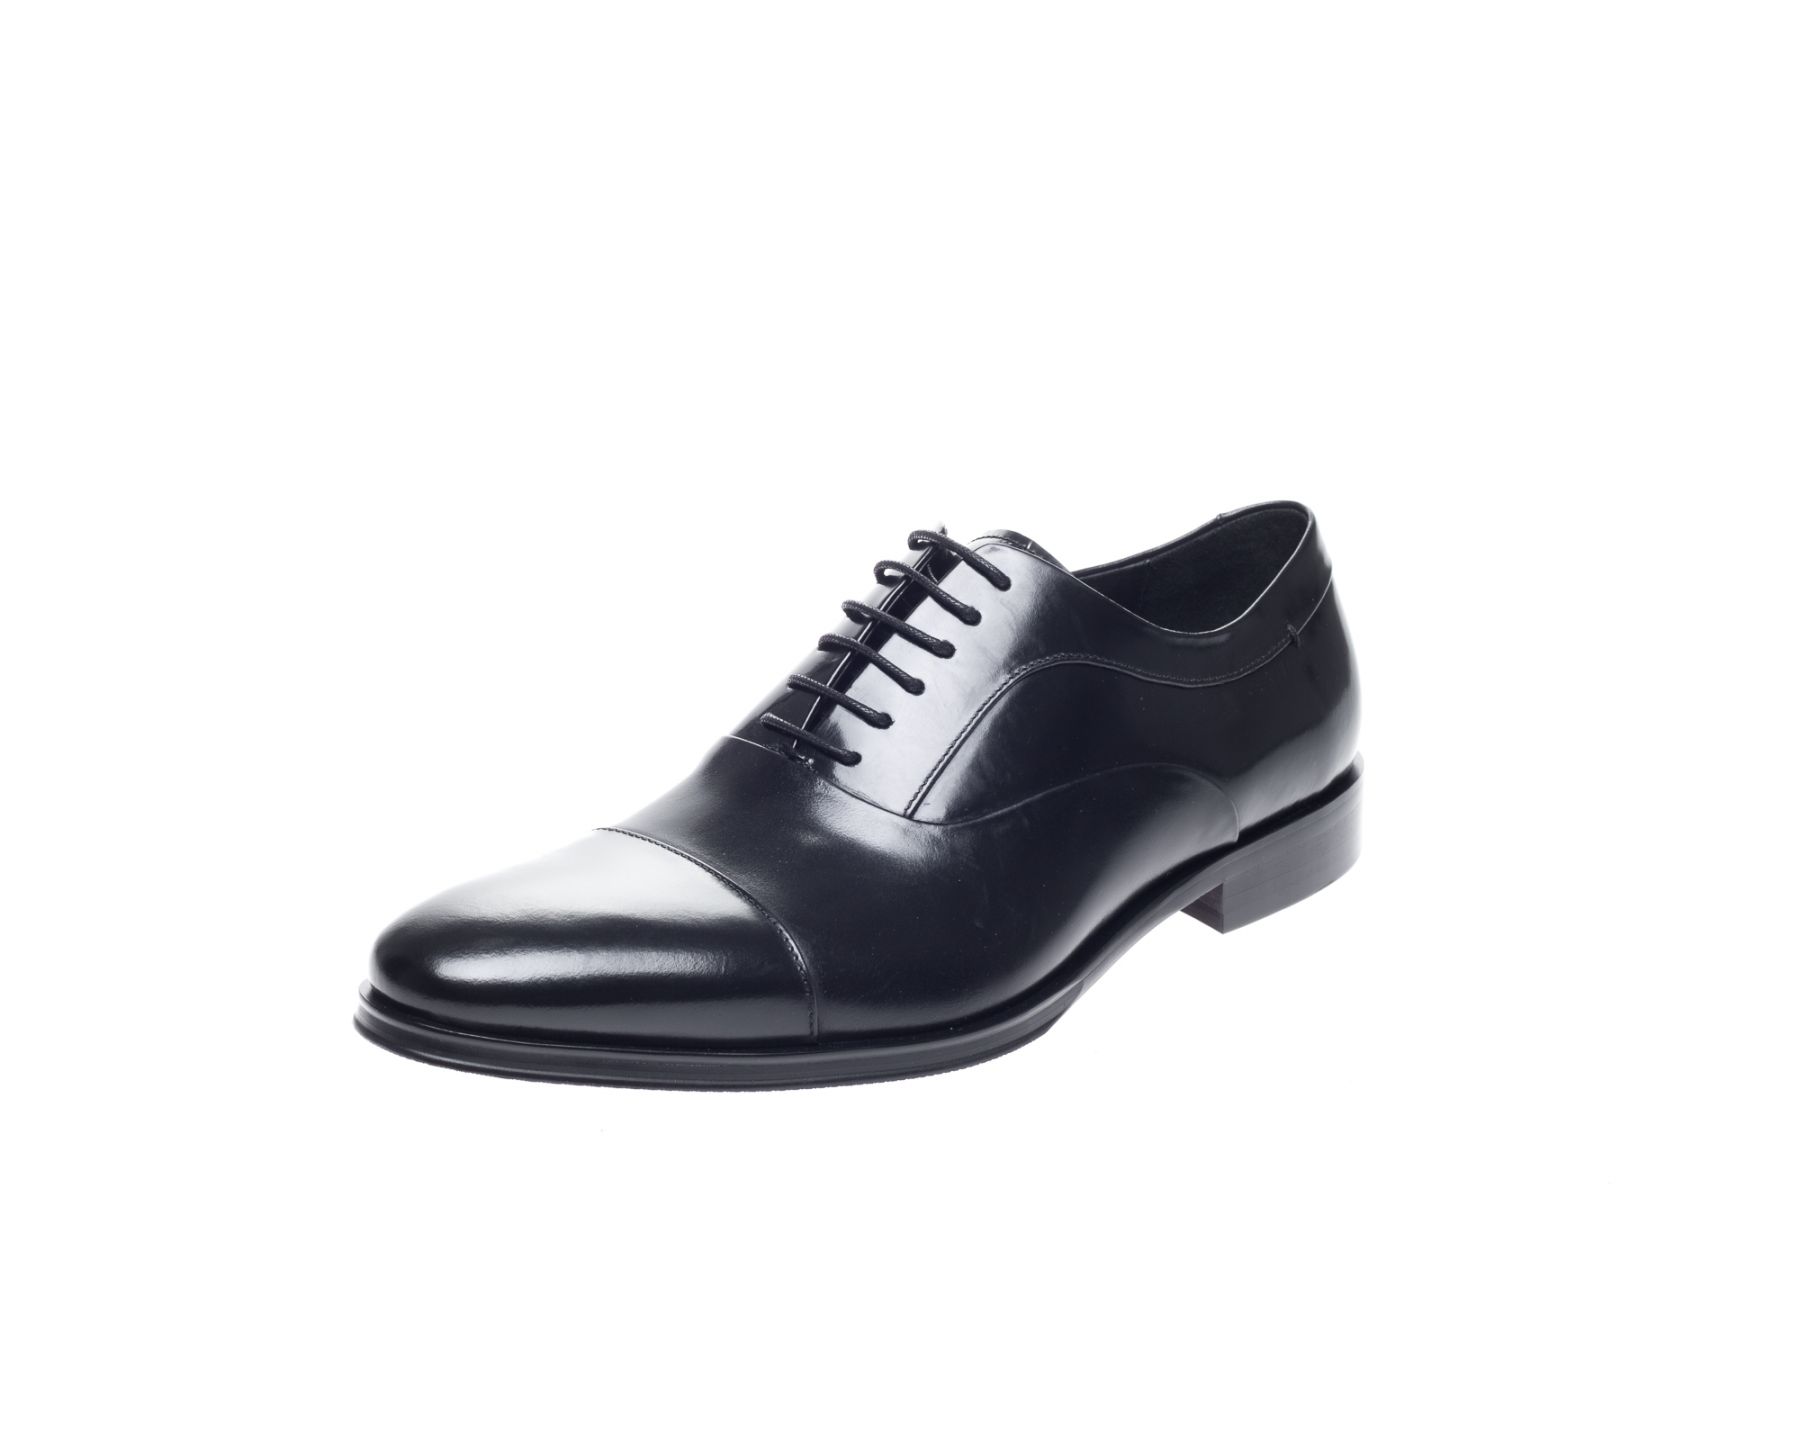 Men's John White Guildhall Capped Oxford Leather Shoes - Black